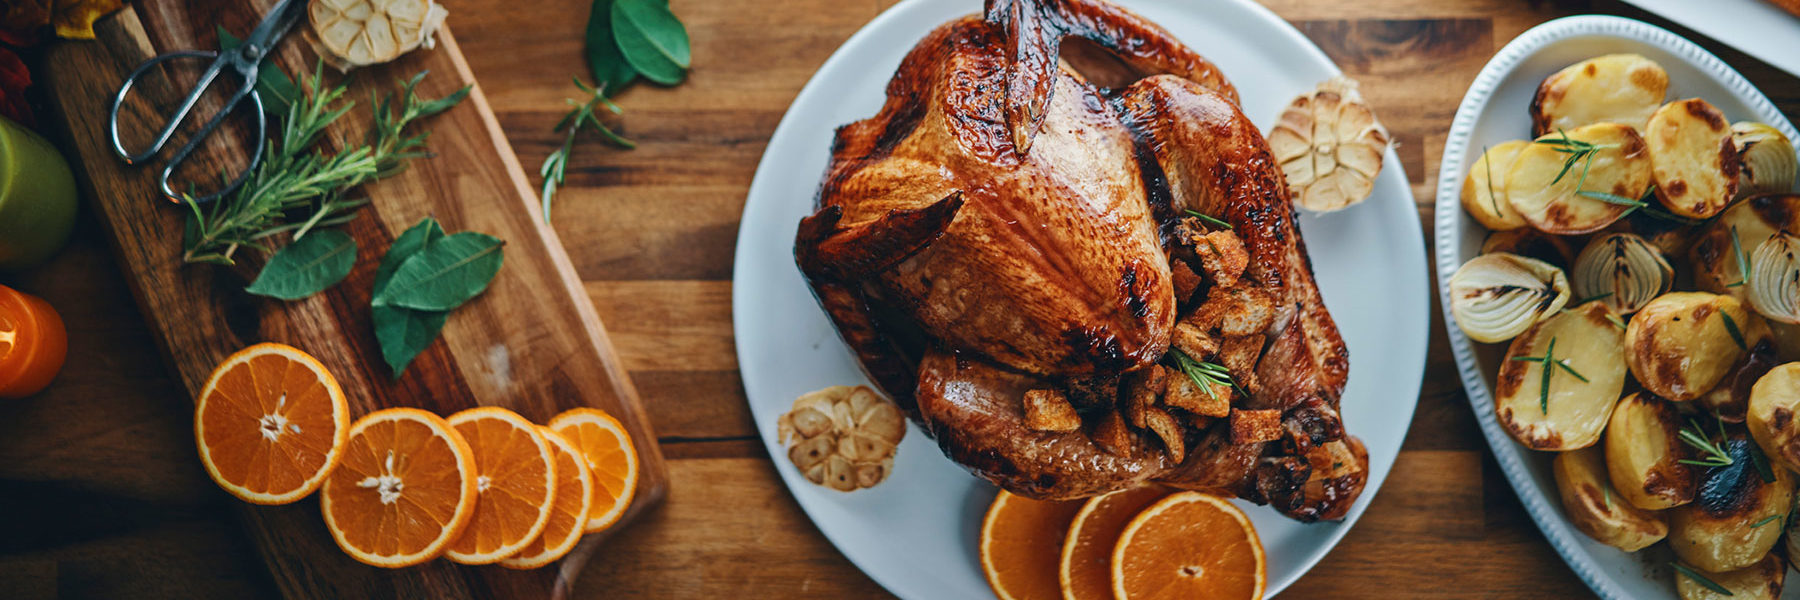 Is the Giving Tuesday Turkey Overcooked?